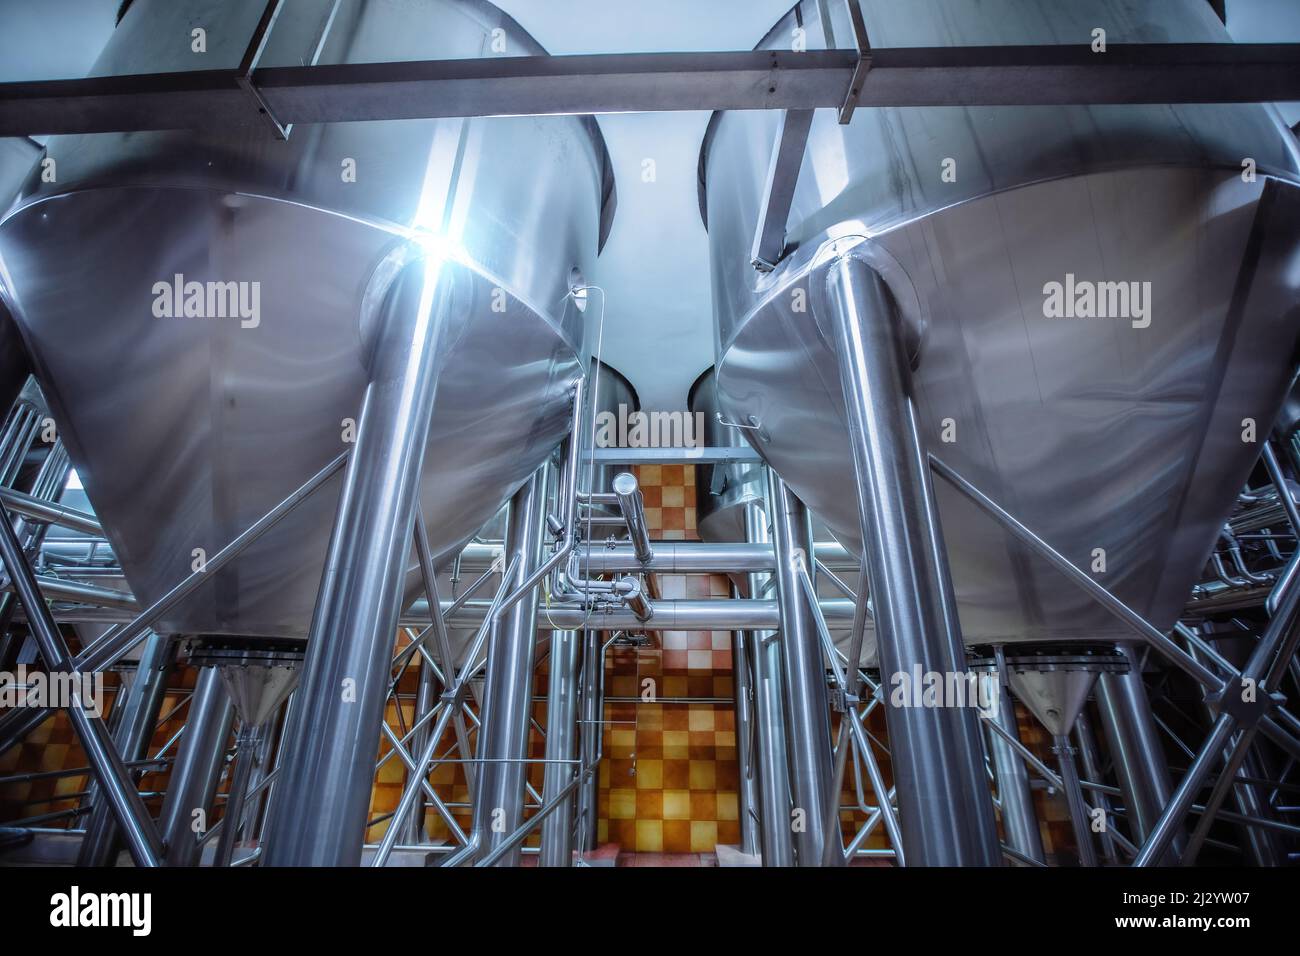 Vats for fermentation. Craft beer production line in modern brewery Stock Photo